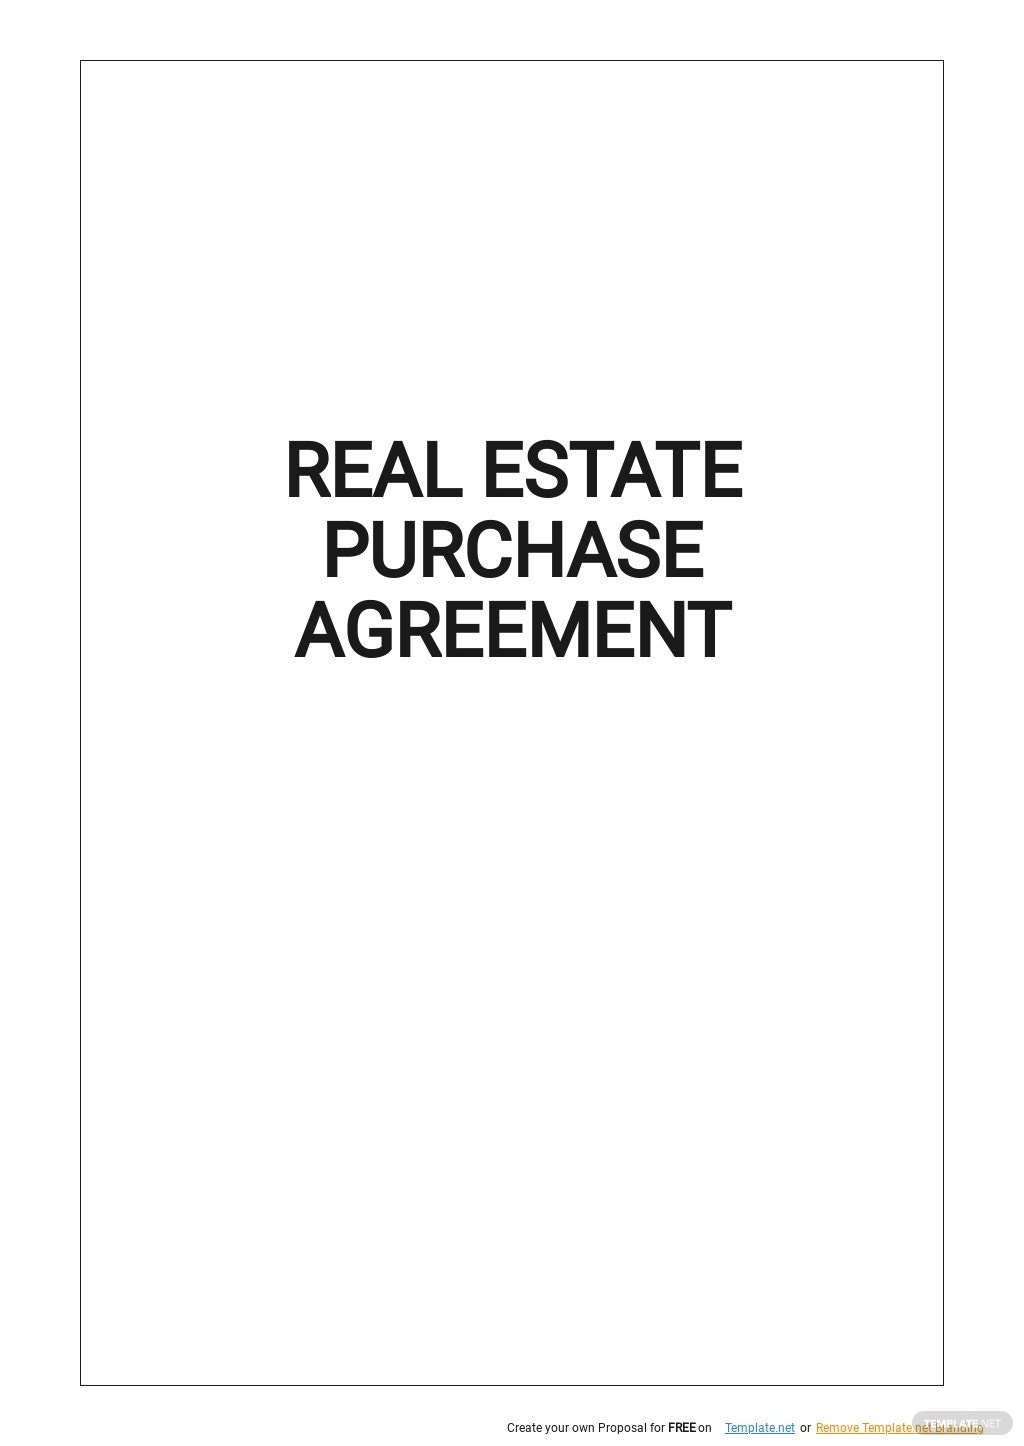 Real Estate Purchase Agreement Template ?width=480